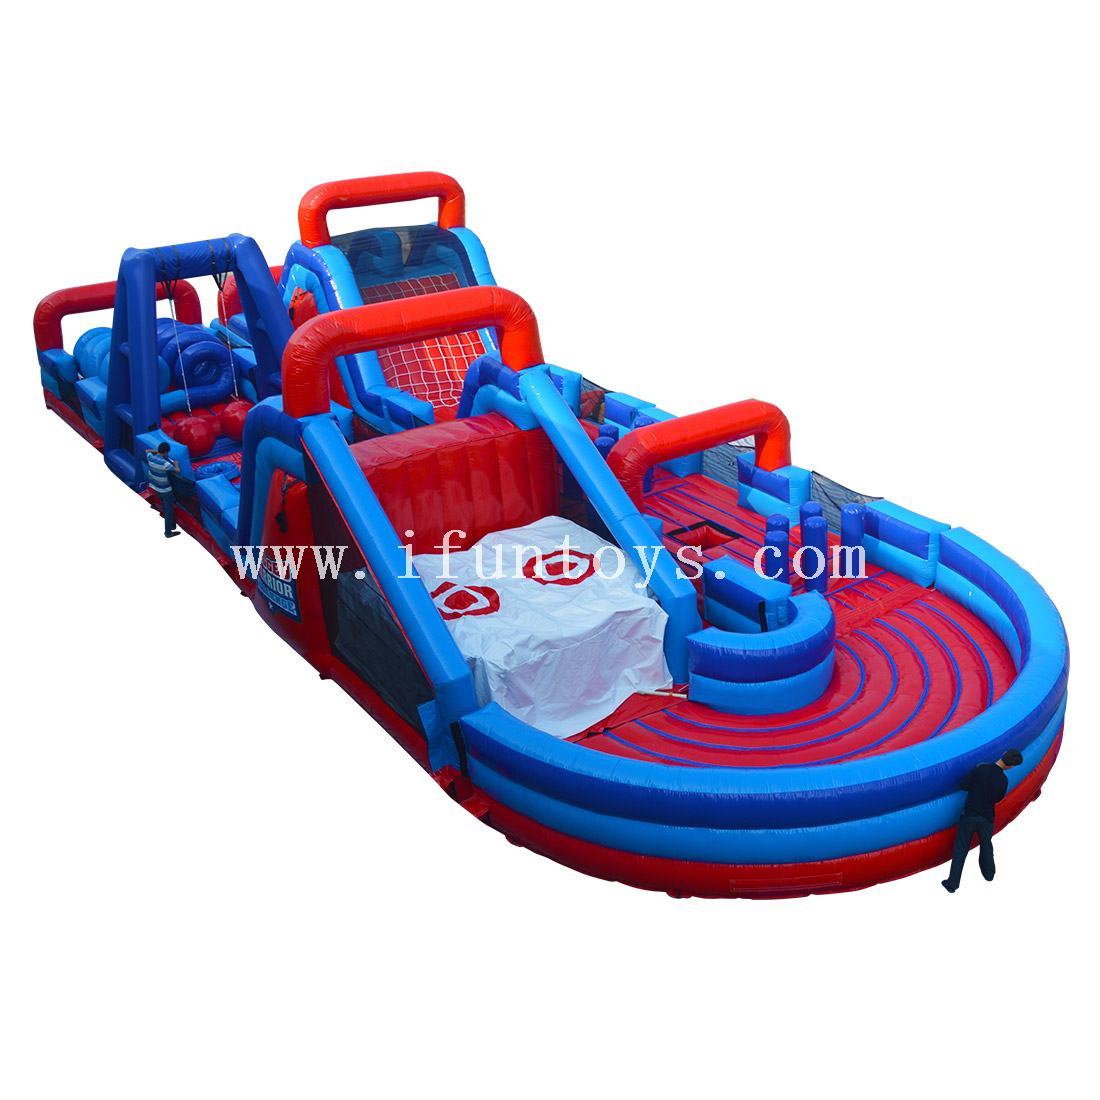 Inflatable Rugged Warrior Obstacle/inflatable Challenge Mega Obstacle Course /inflatable wipeout course For sport game